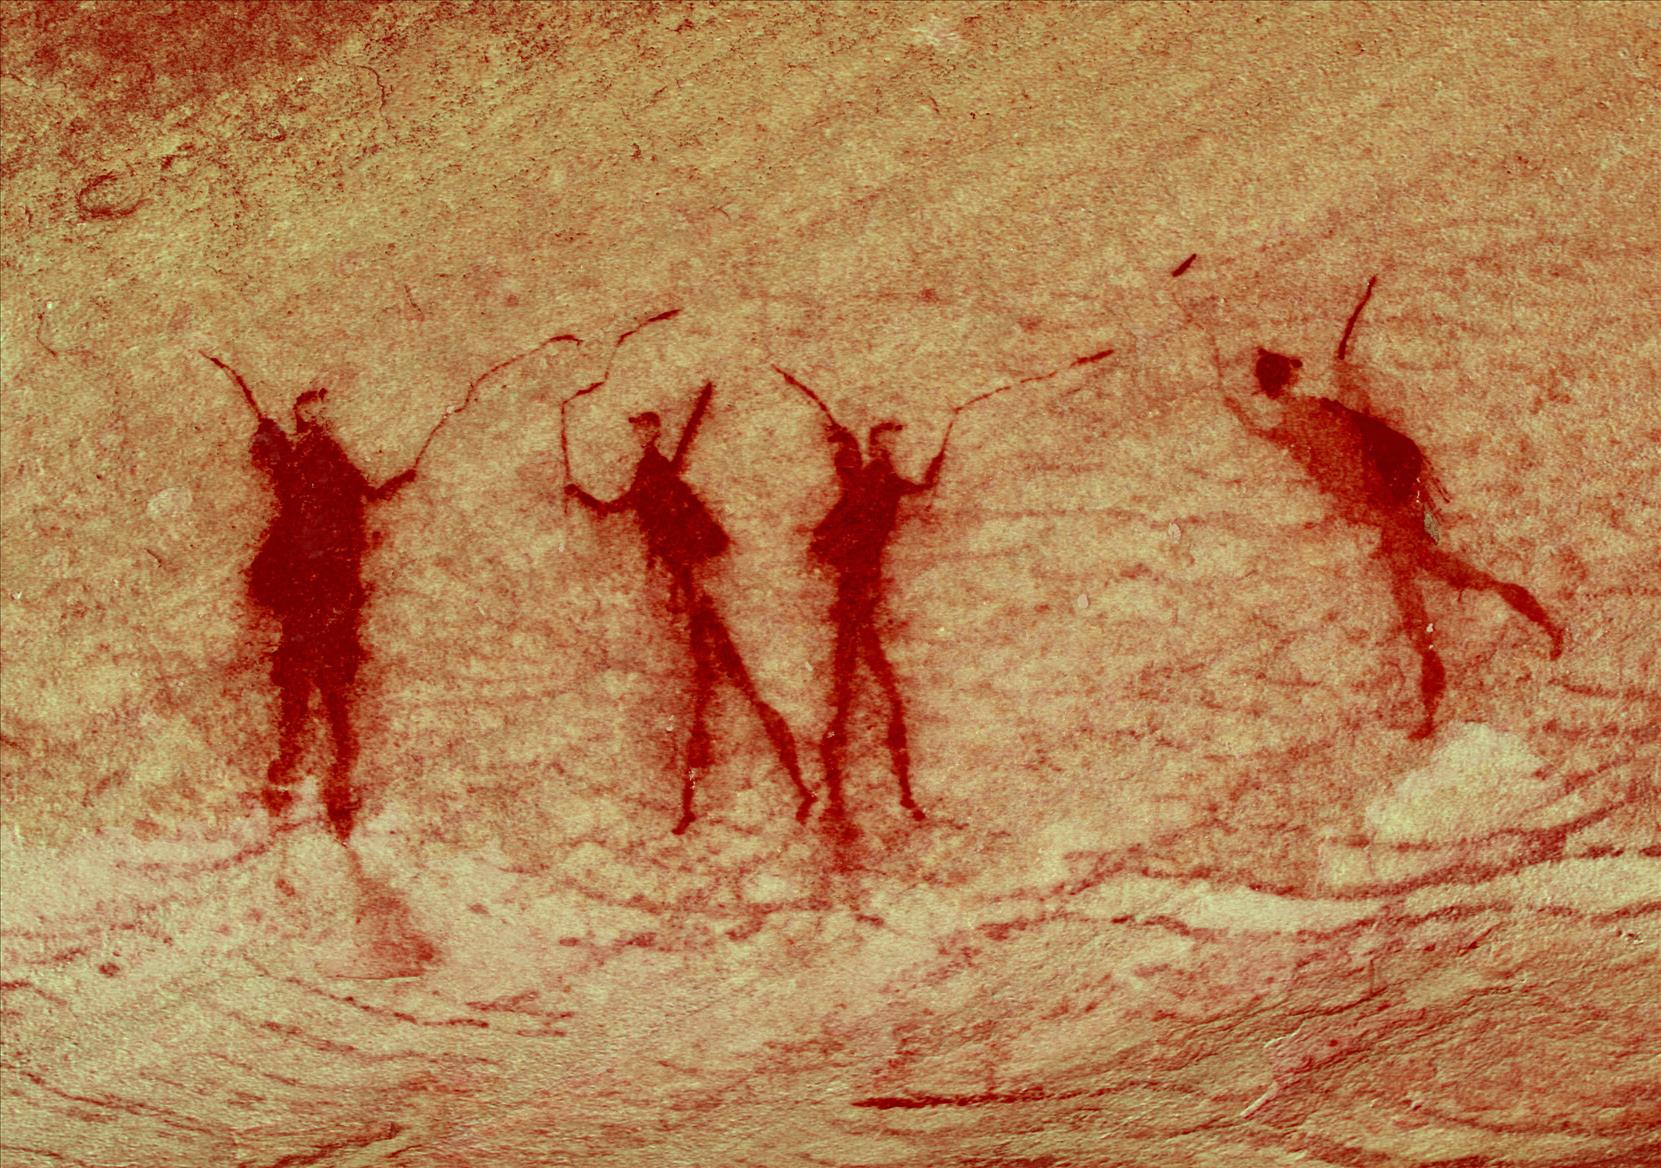 How The Music Of An Ancient Rock Painting Was Brought To Life